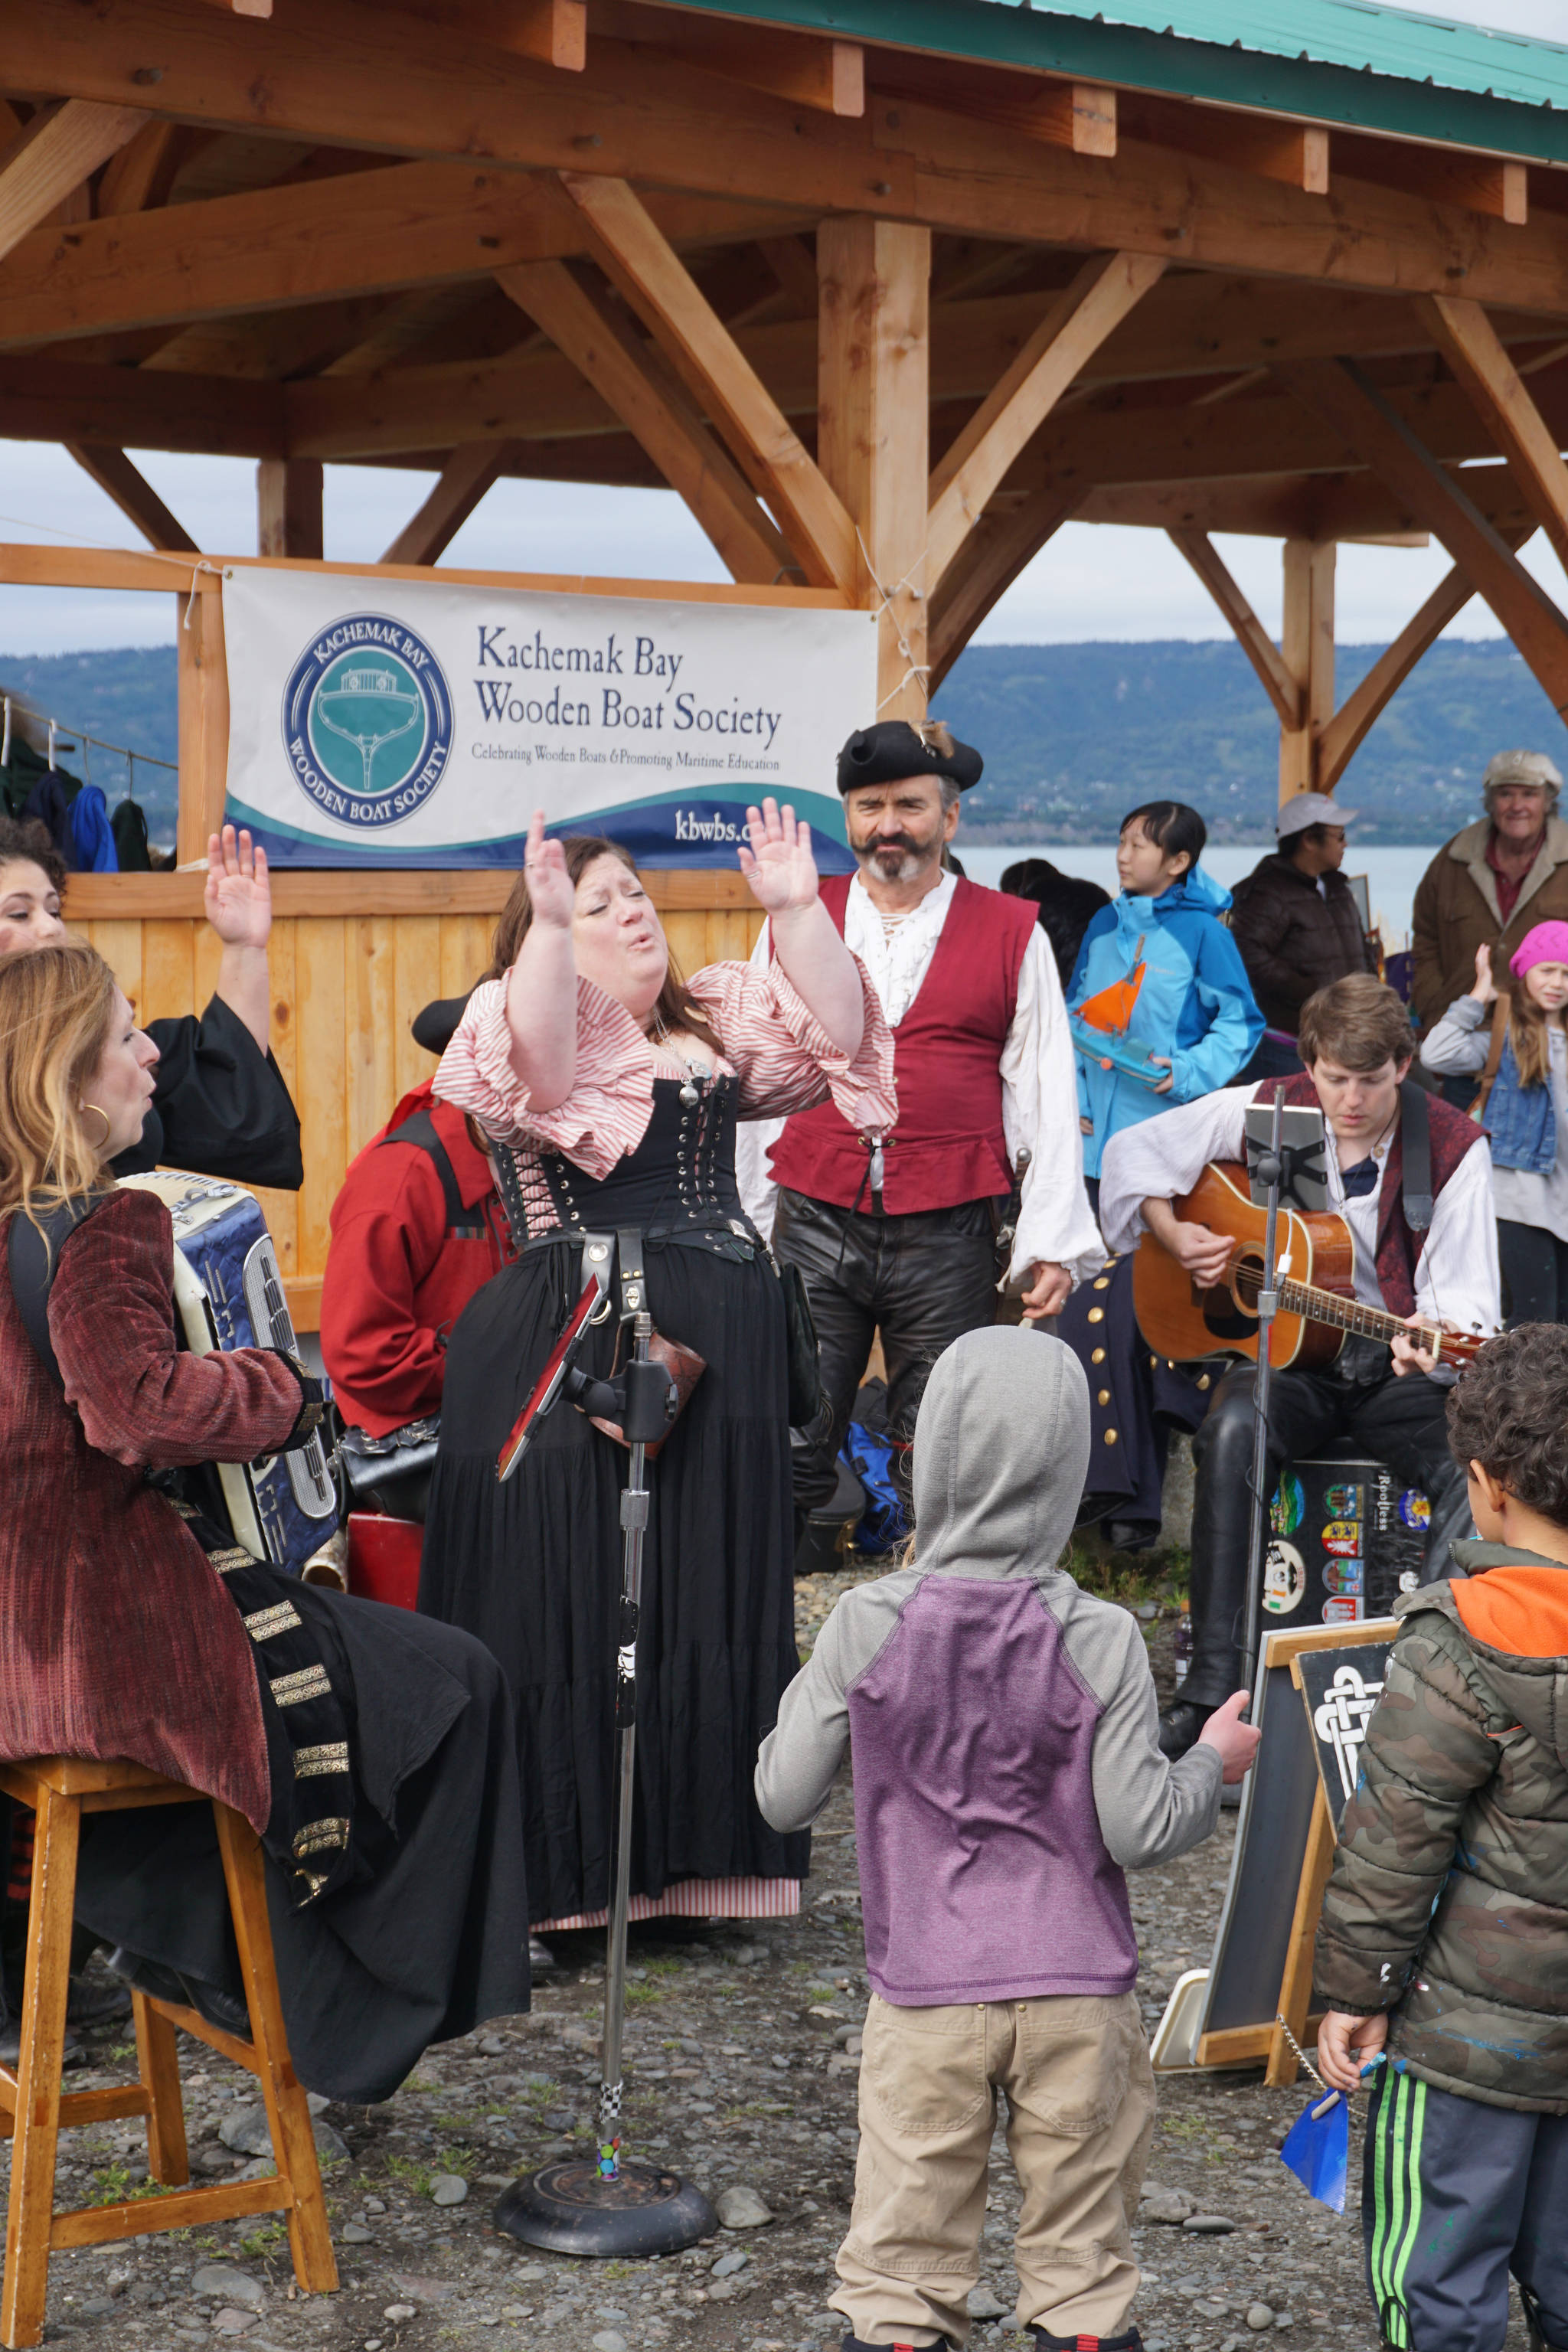 Erin Searcy-Dudgeon Wells of Rogues & Wenches, center, leads a sing along at the Kachemak Bay Wooden Boat Society Festival on Saturday, Sept. 2, 2017 at the Nick Dudiak Fishing Lagoon campground in Homer, Alaska. At left are Lucia Woofter and Lena Gonzales. At far right is Hunter Woofter, Devin Frey, second from right, and Bob Woofter, (Photo by Michael Armstrong, Homer News)